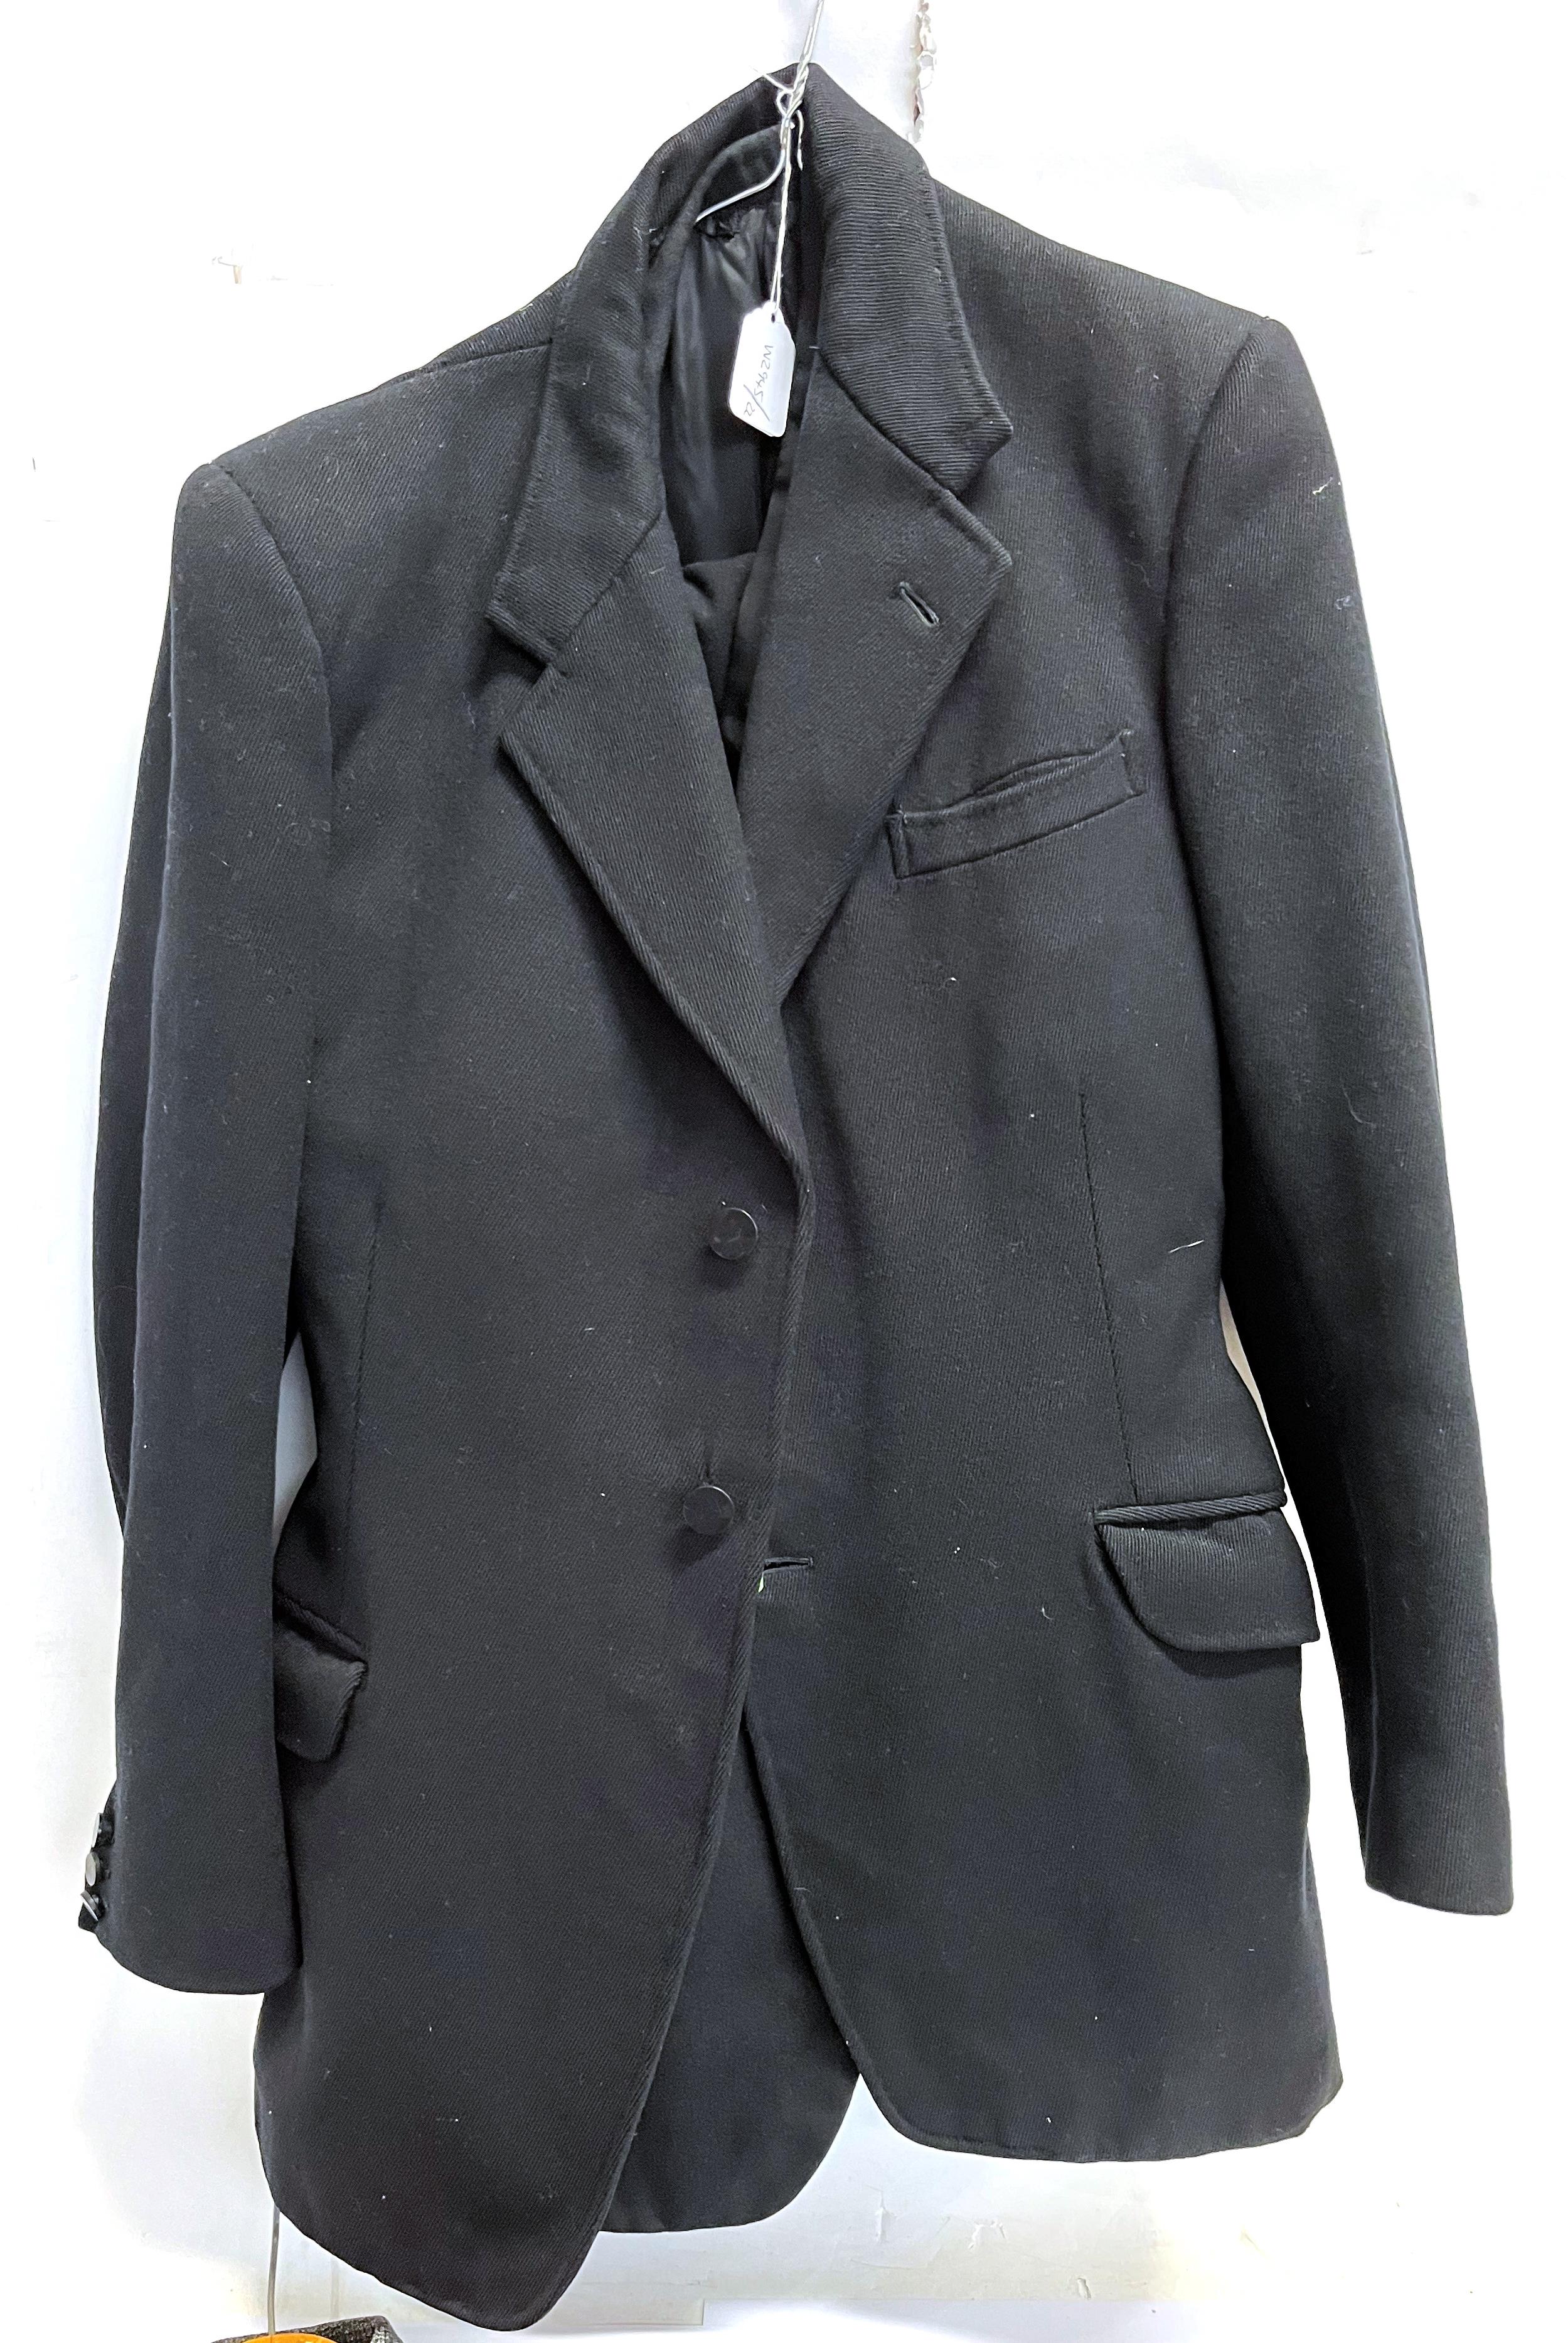 A GENTS THREE PIECE SUIT BY BURTONS. - Image 3 of 3